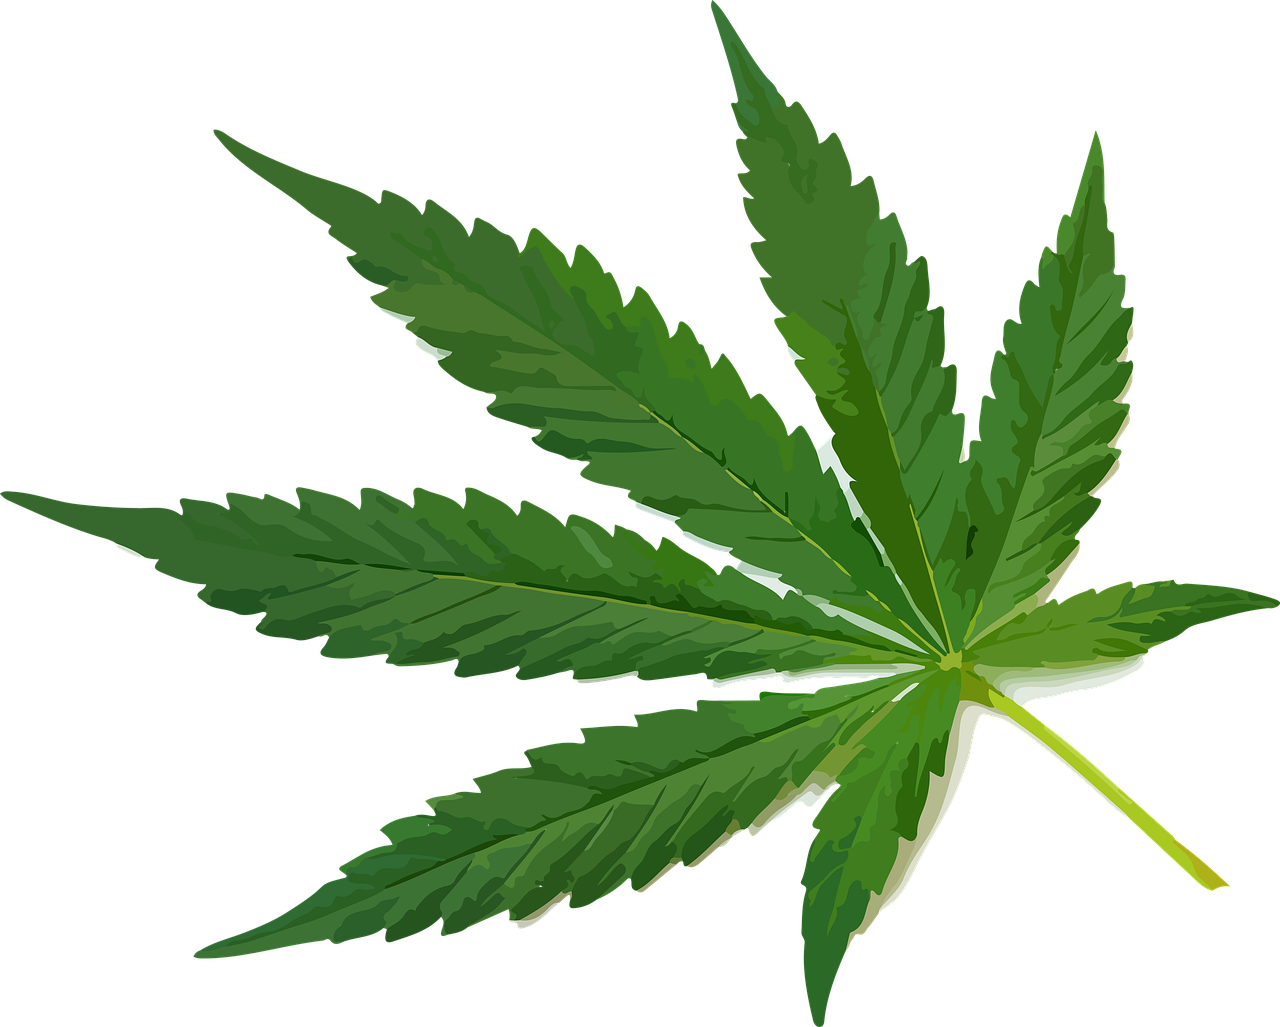 a marijuana leaf on a black background, an illustration of, inspired by Mary Jane Begin, hurufiyya, sharp high detail illustration, ¯_(ツ)_/¯, high definition screenshot, leaves foliage and stems